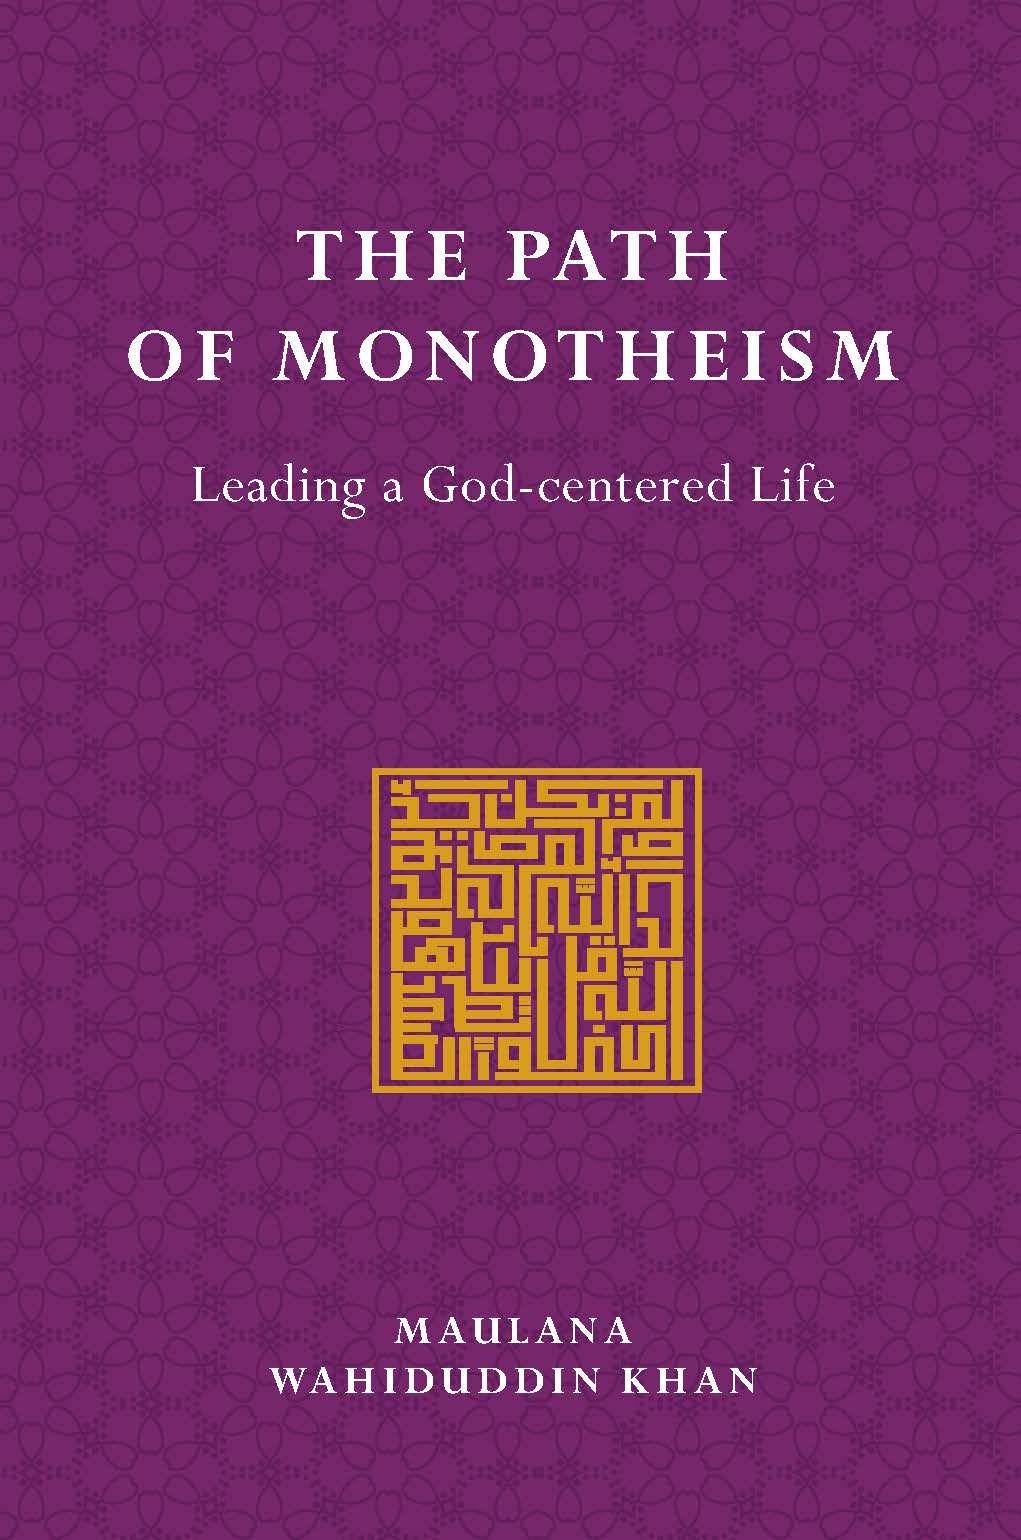 THE PATH OF MONOTHEISM-COVER PAGE